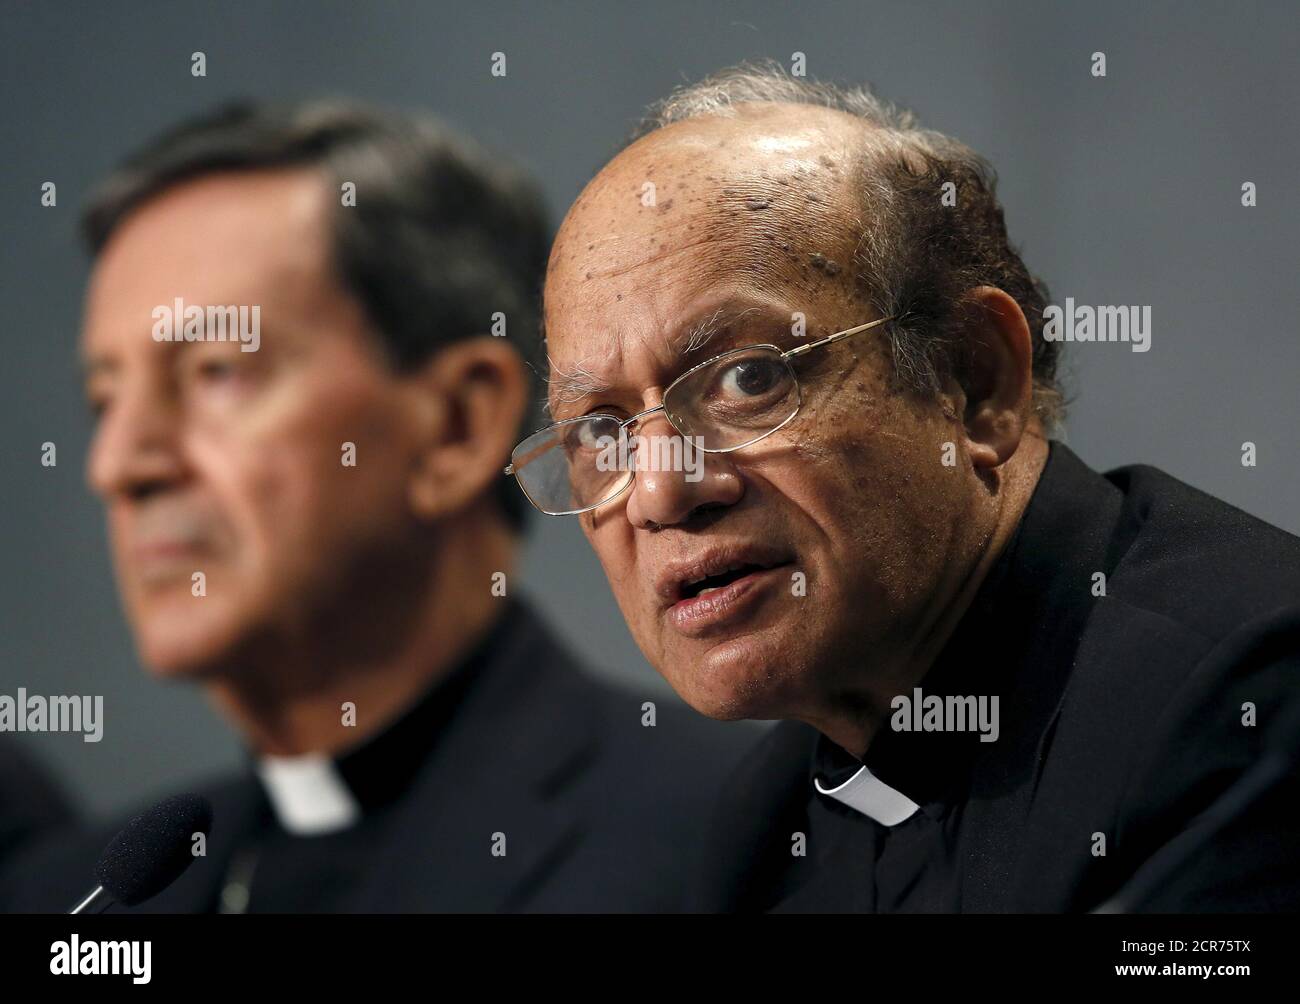 Cardinal Oswald Gracias (R) speaks next to Cardinal Ruben Salazar Gomez during a news conference at the Vatican, October 26, 2015. Roman Catholic leaders from around the world on Monday made a joint appeal to a forthcoming United Nations conference on climate change to produce a 'fair, legally binding and truly transformational' agreement.REUTERS/Alessandro Bianchi Stock Photo